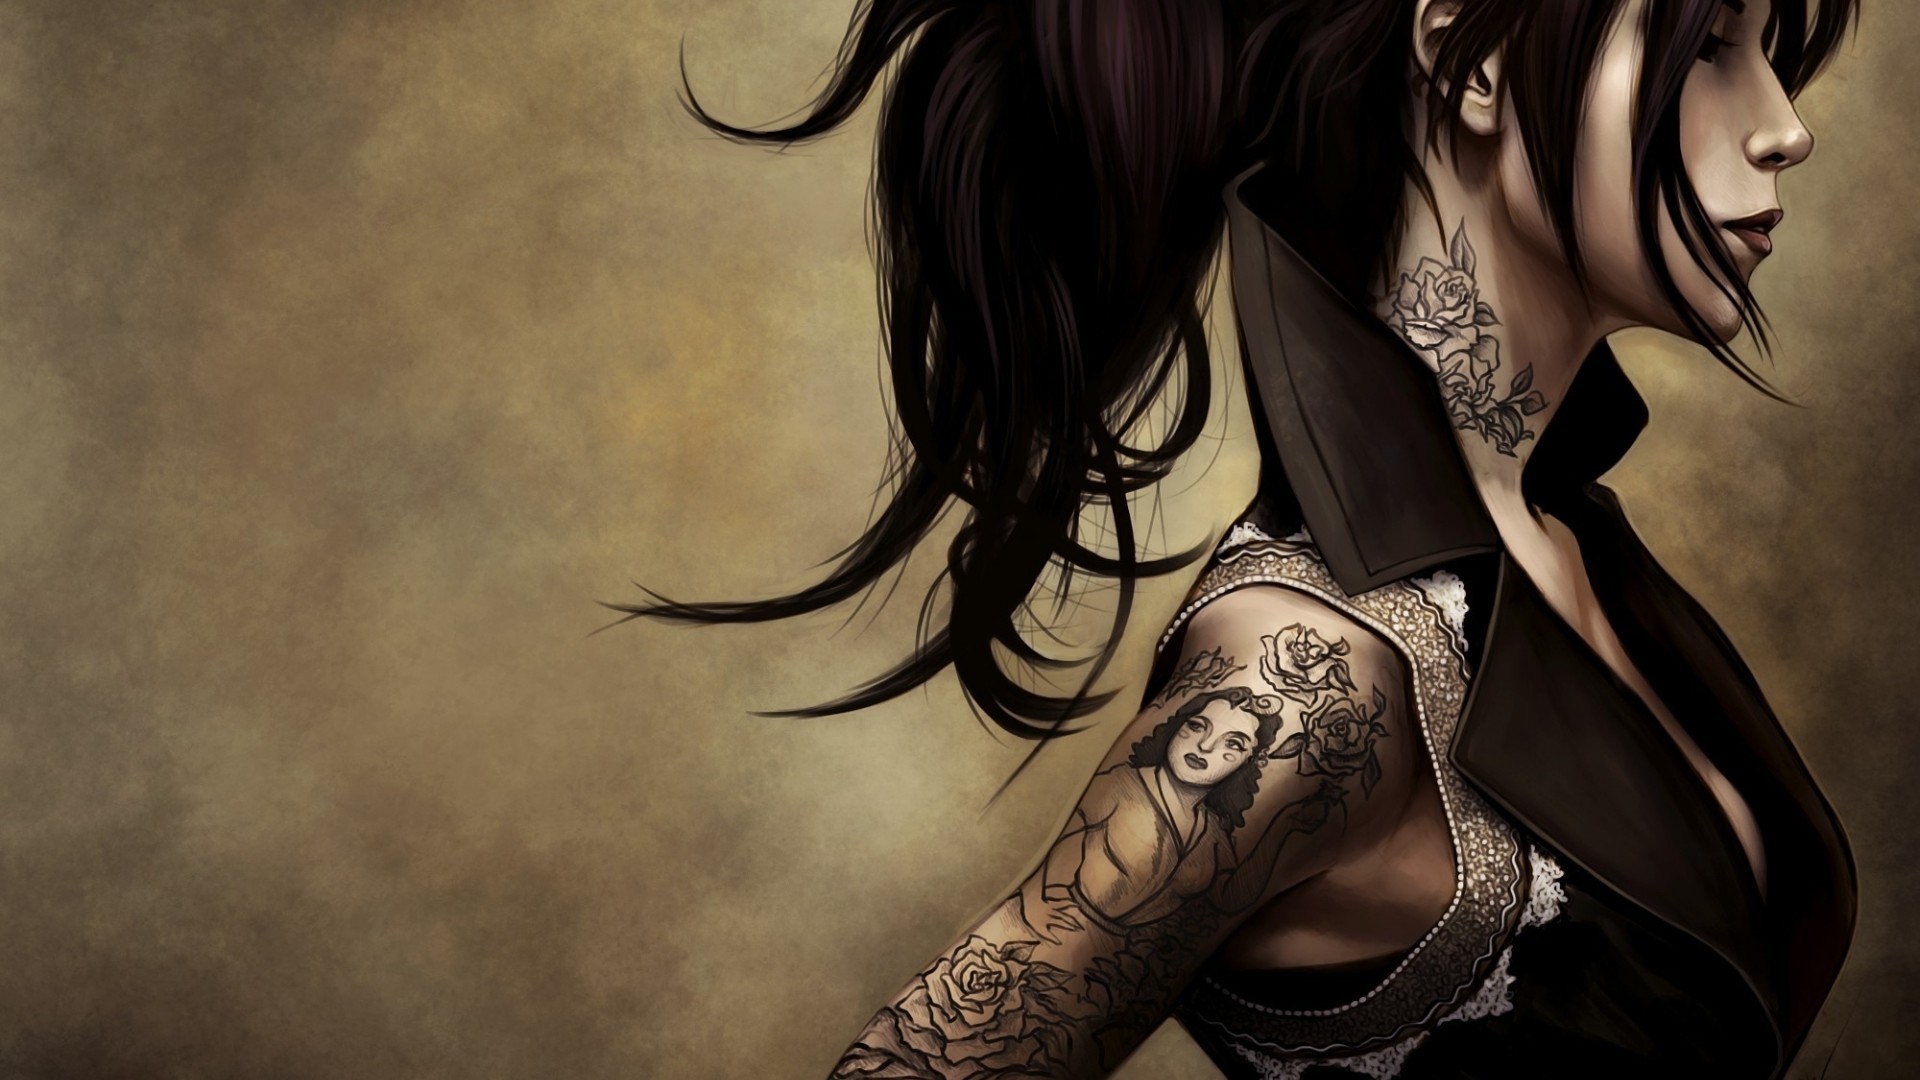 1920x1080 Tattoos Wallpapers Wallpapers